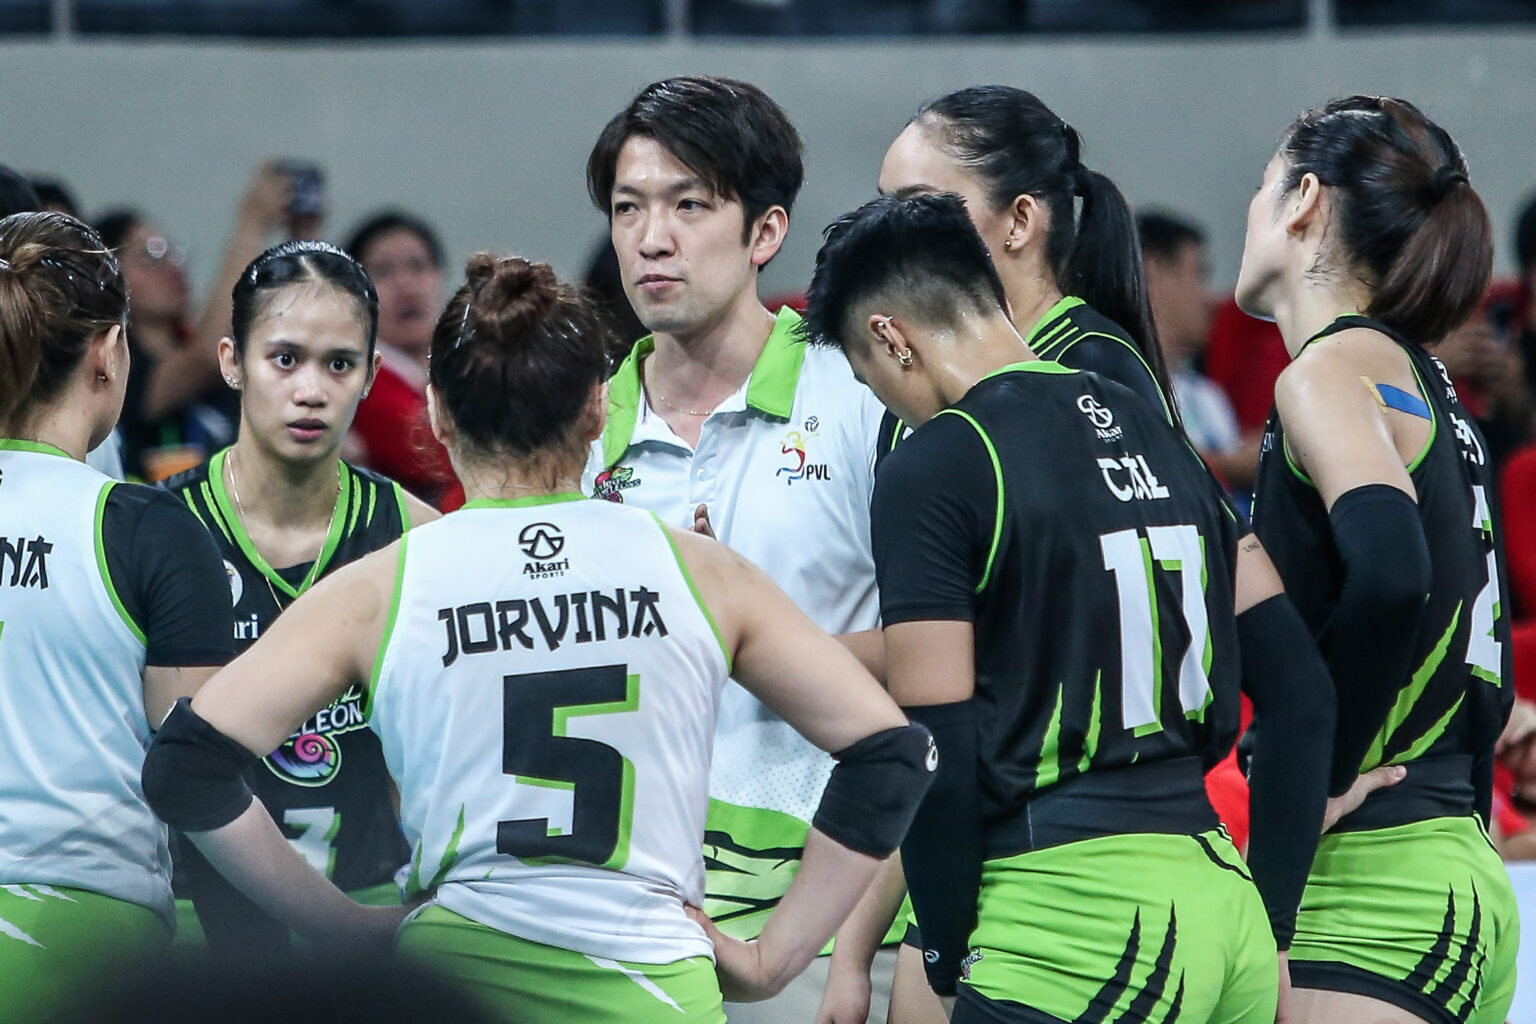 PVL: Sister teams Akari, Nxled trade coaches, players–sources